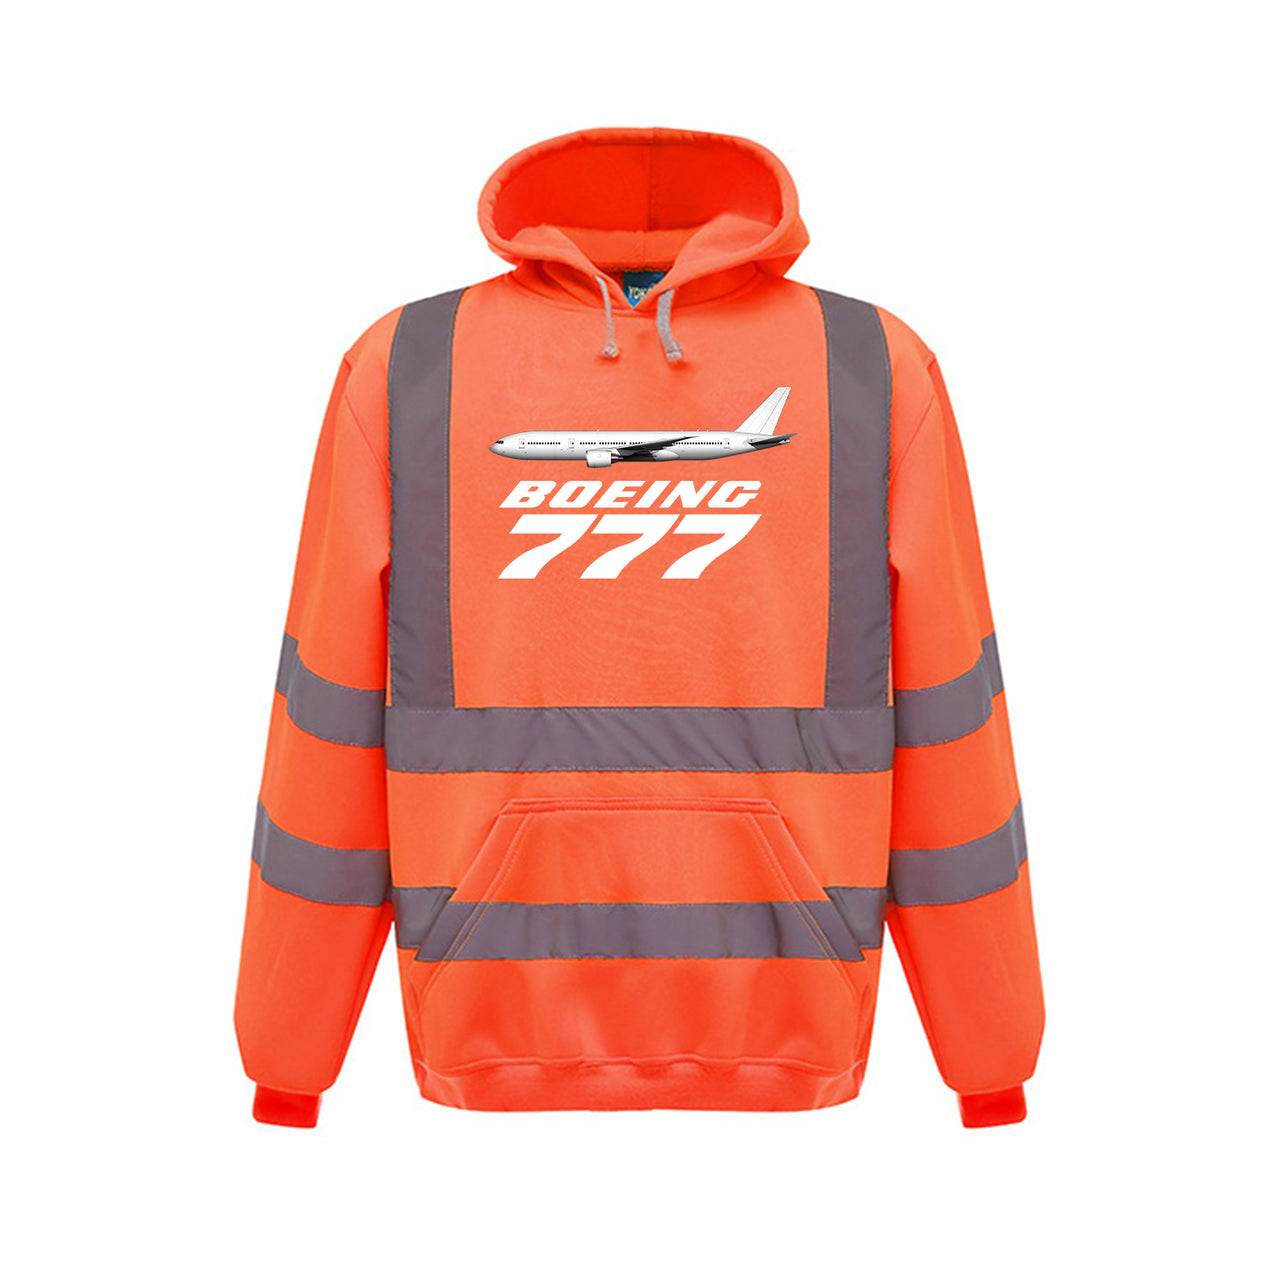 The Boeing 777 Designed Reflective Hoodies